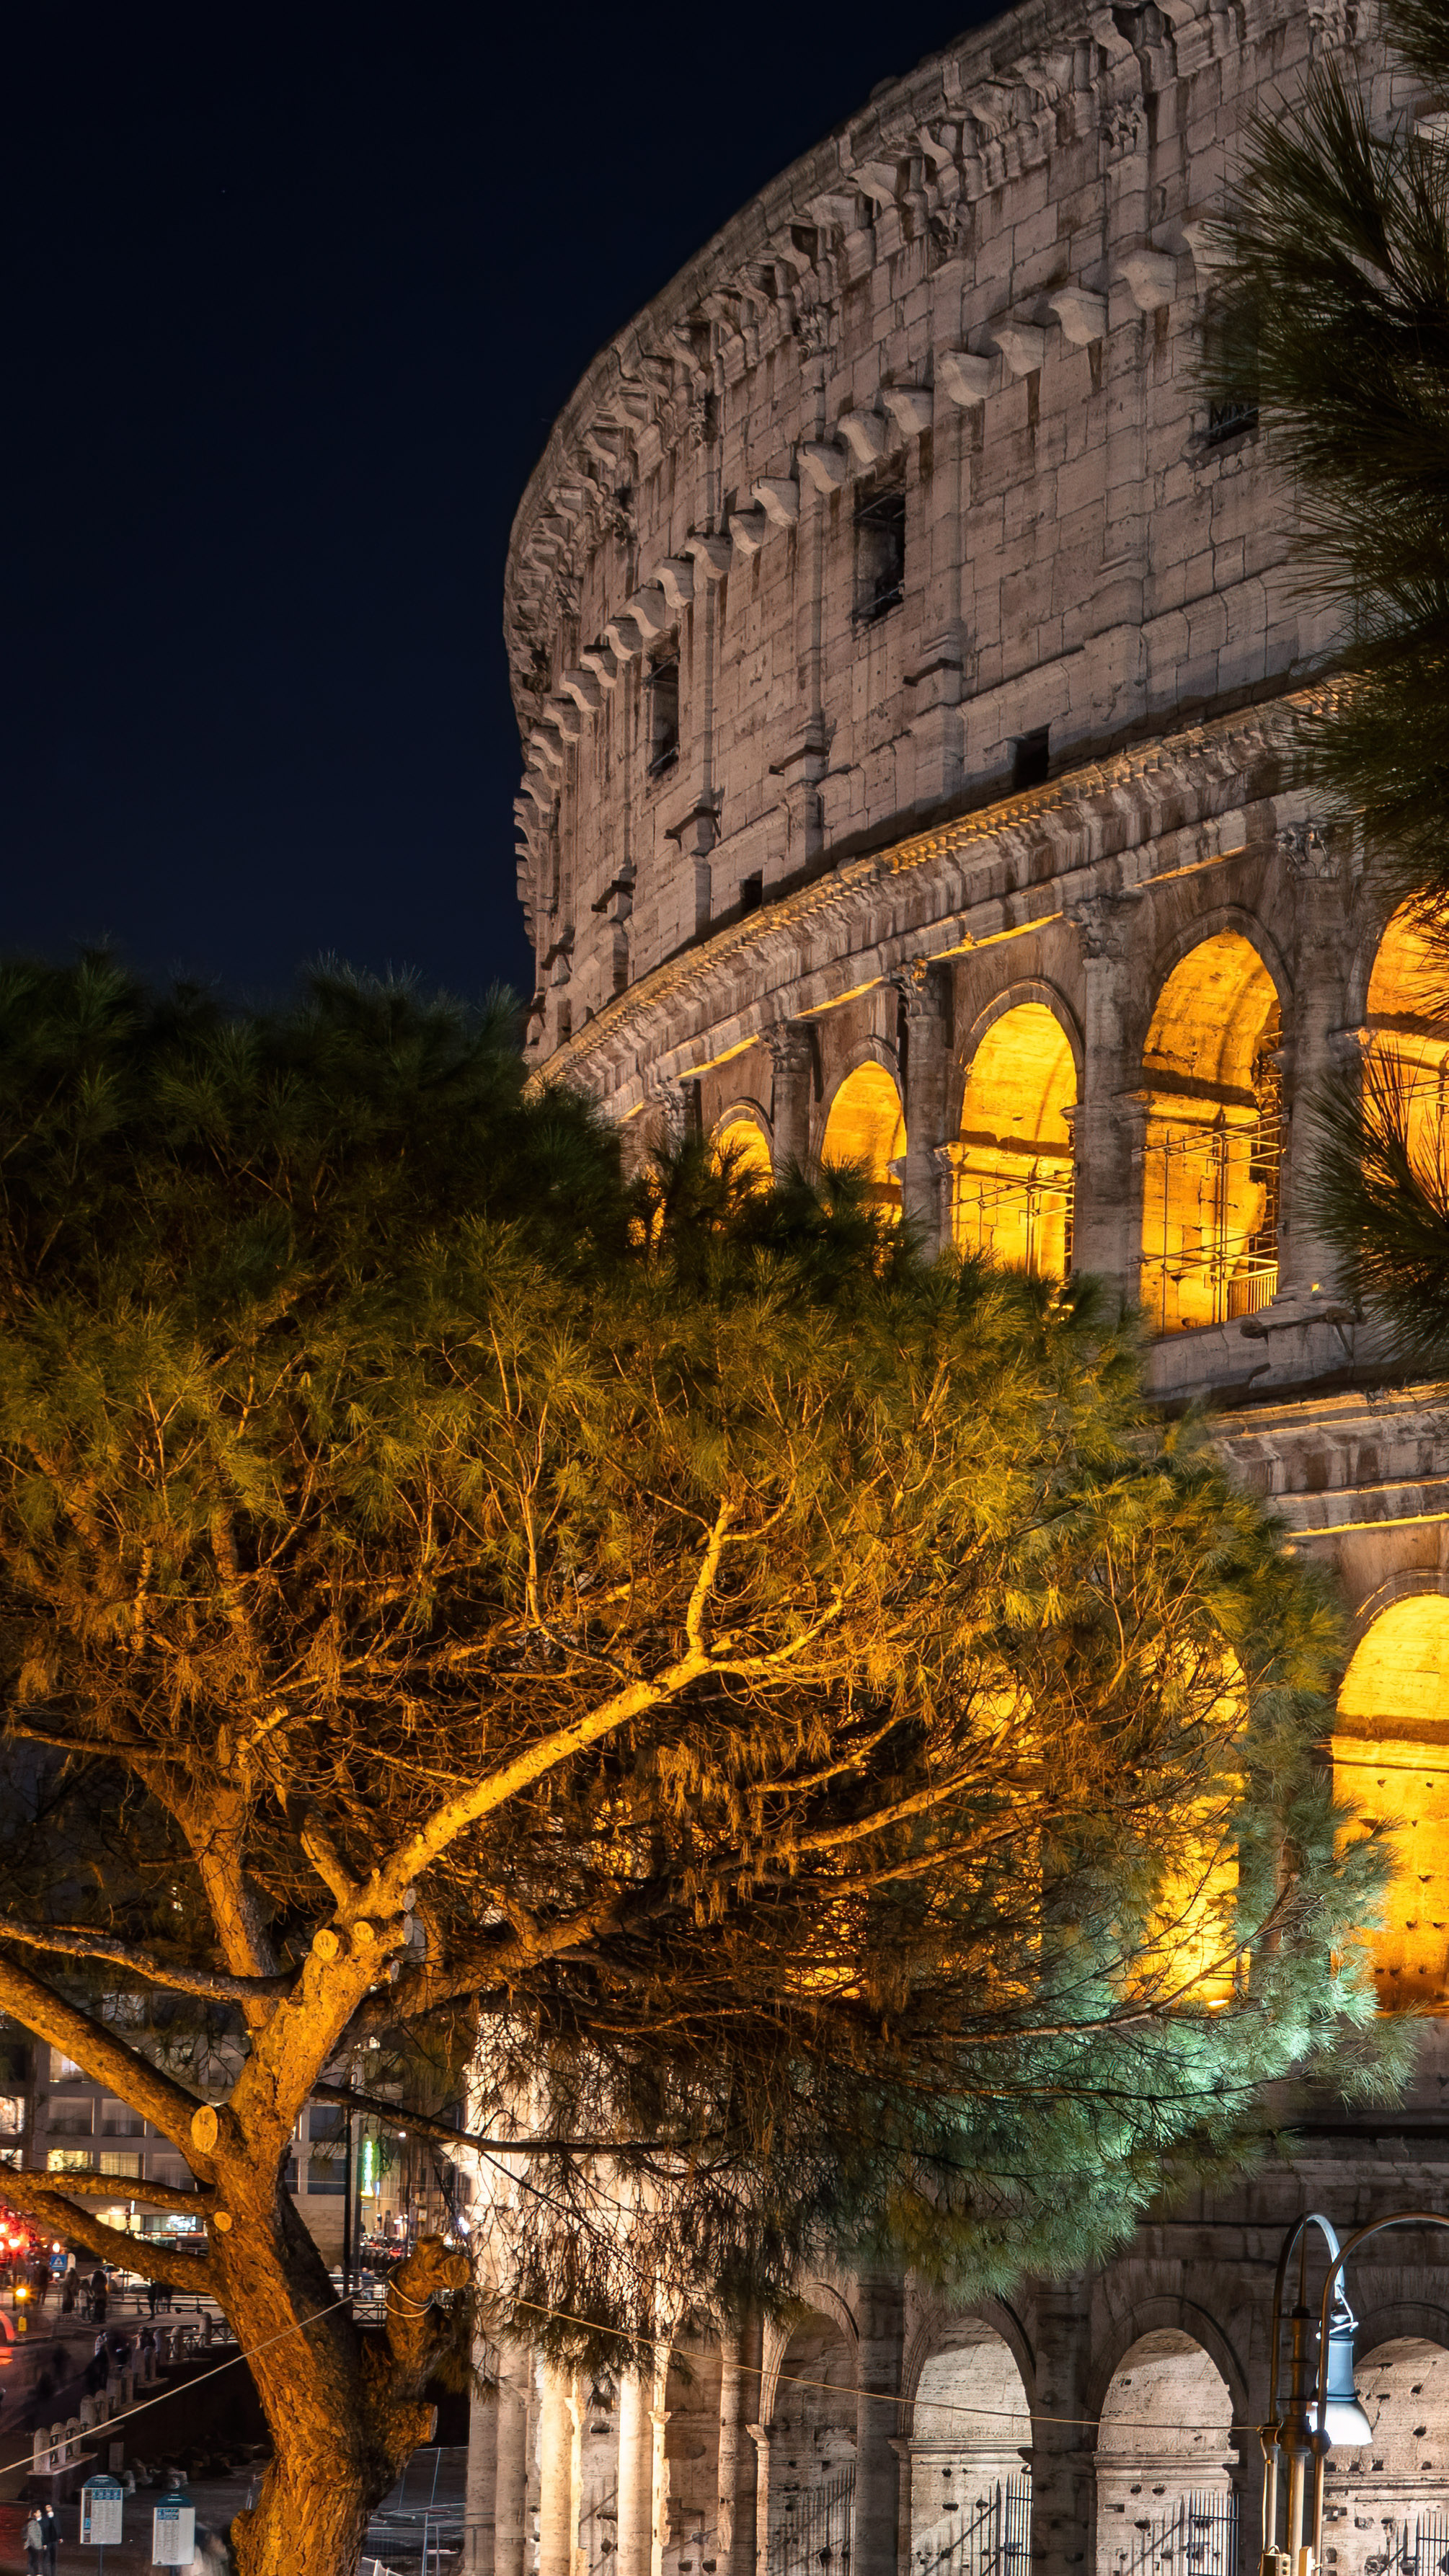 Embrace the beauty of Rome's Colosseum lights with this amazing nighttime wallpaper